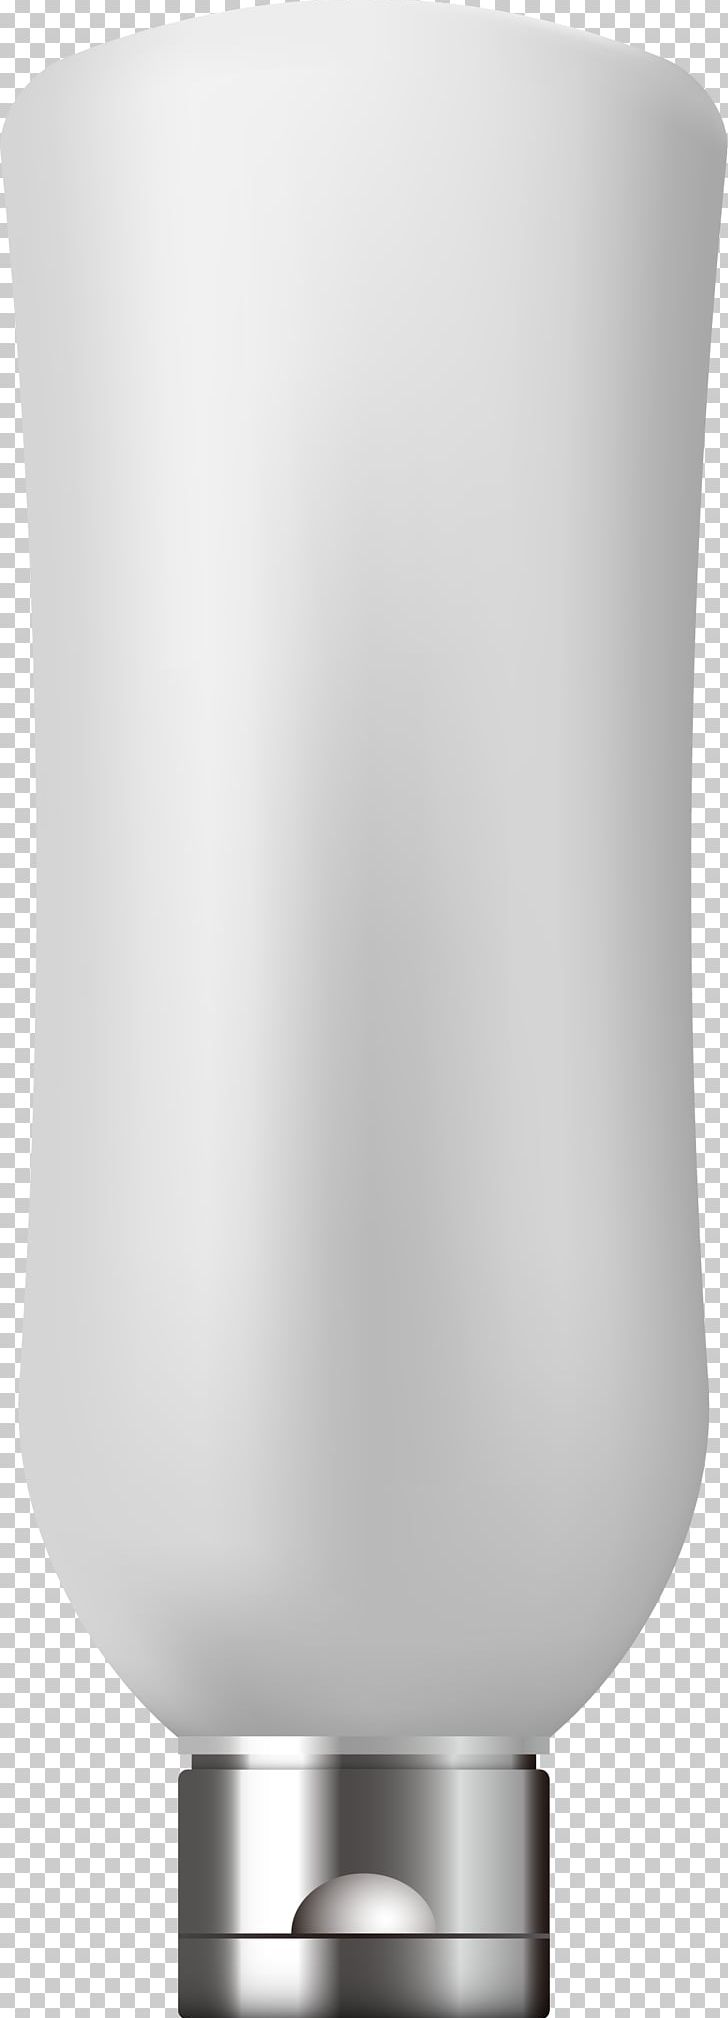 Sunscreen Bottle Cream White PNG, Clipart, Black White, Care, Euclidean Vector, Gratis, Happy Birthday Vector Images Free PNG Download